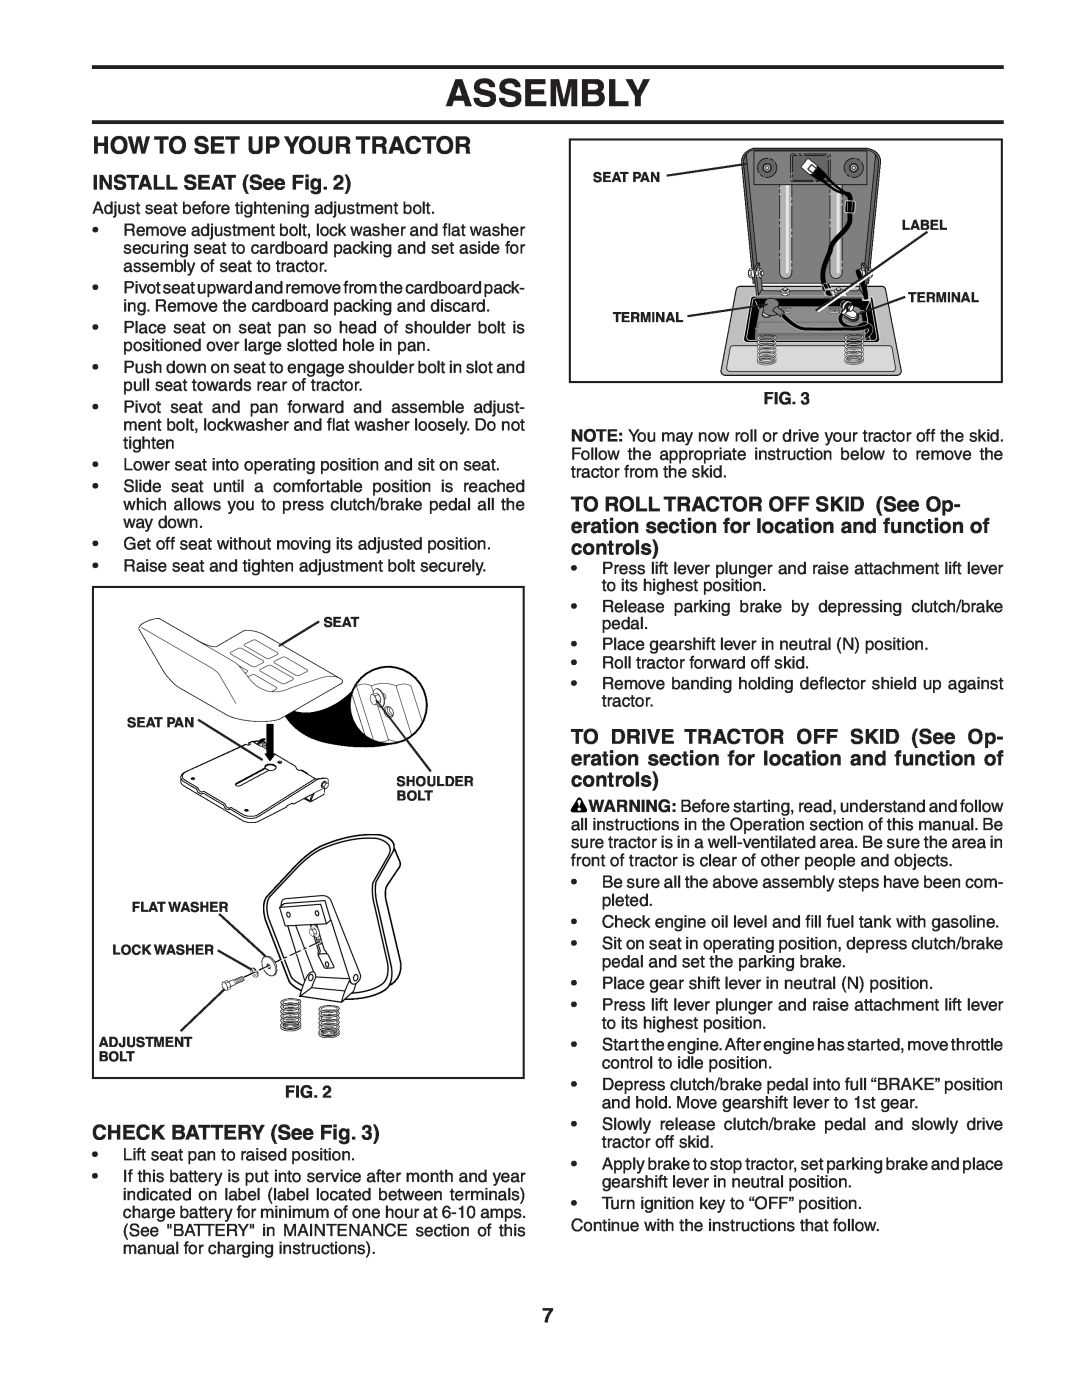 Poulan PO1742STA manual How To Set Up Your Tractor, INSTALL SEAT See Fig, CHECK BATTERY See Fig, Assembly 